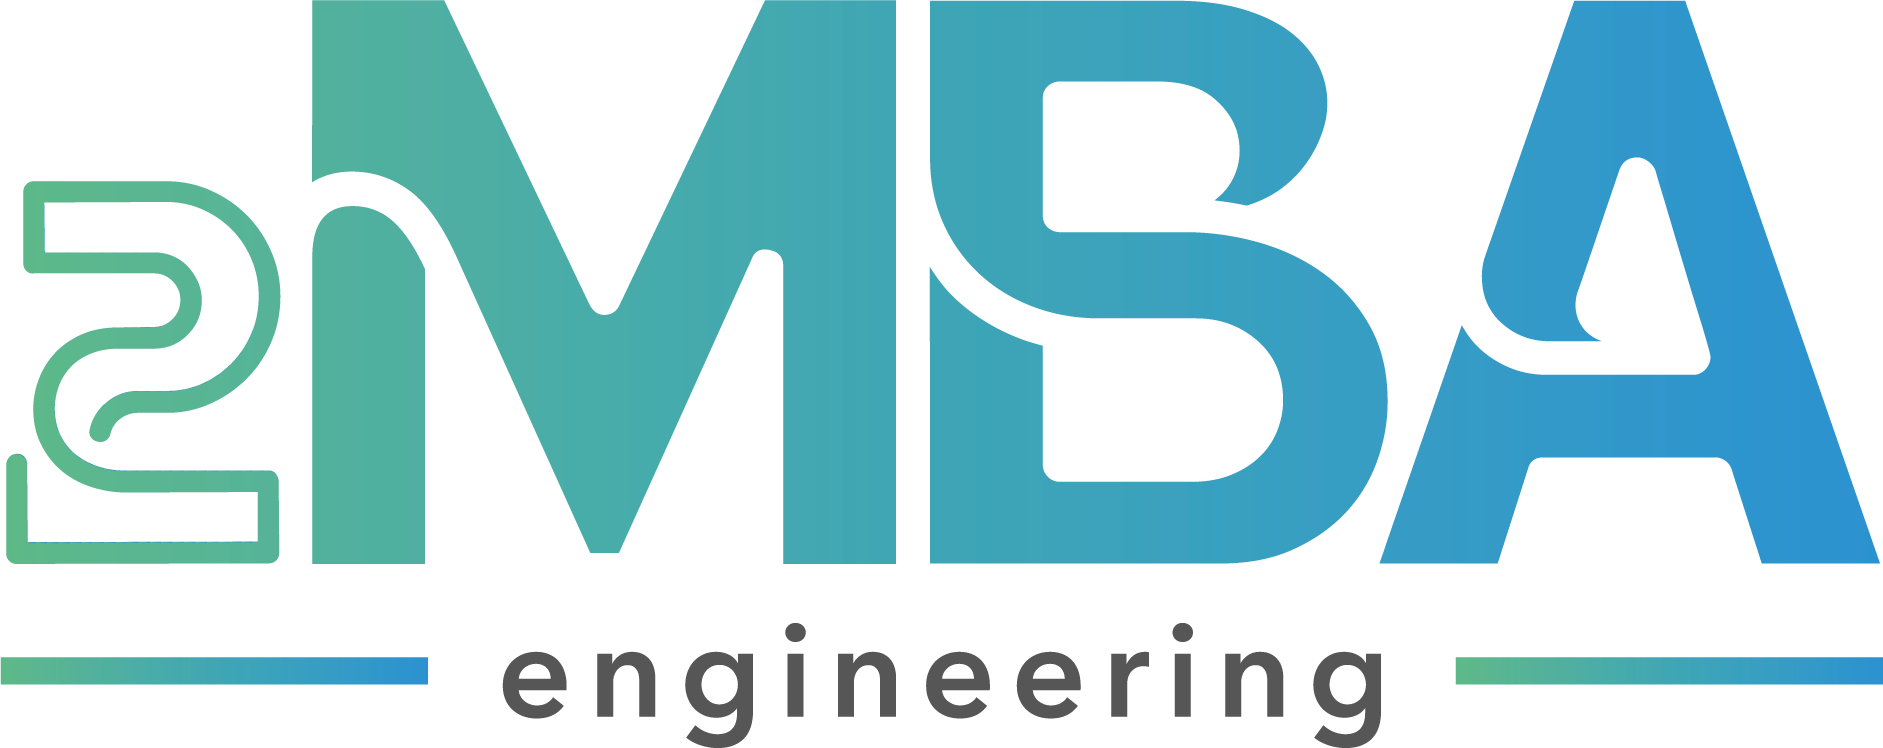 2MBA Engineering S.R.L.